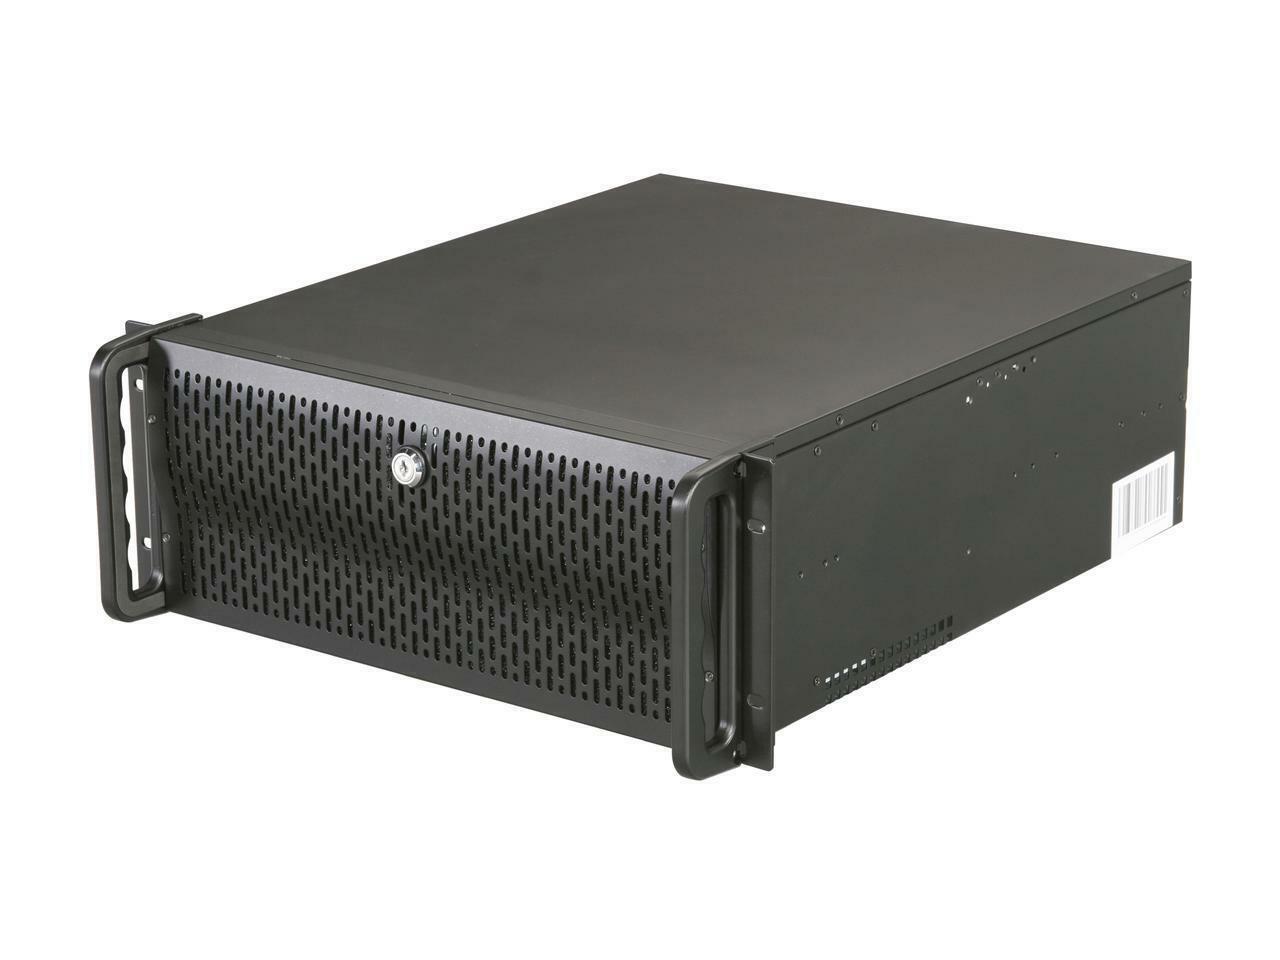 Rosewill Server Case or Chassis - RSV-R4000 - 4U Rackmount - 4 x Included Coolin